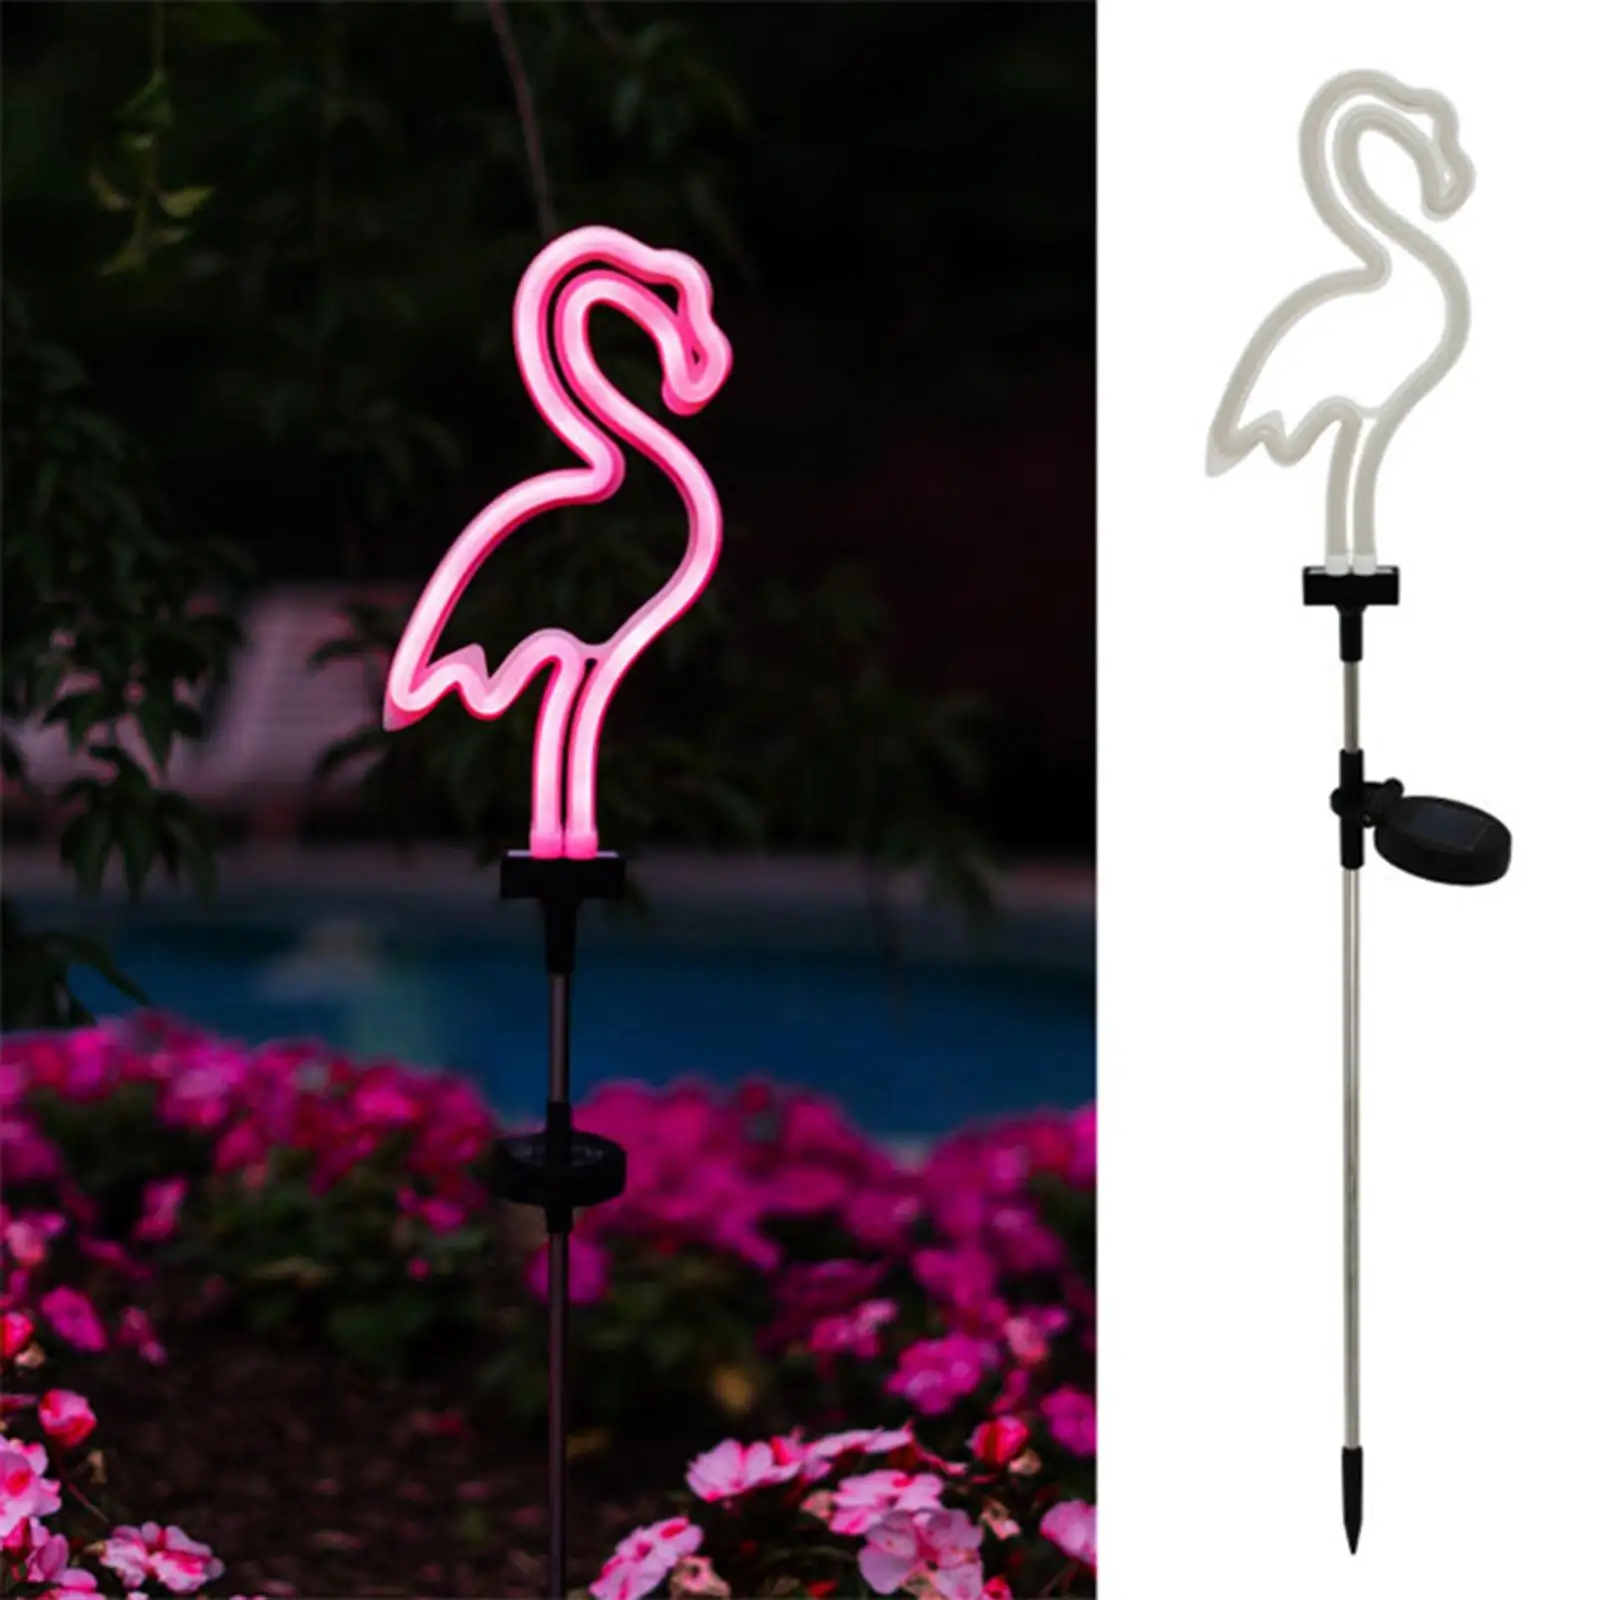 Solar-Powered Light Flamingo Landscape Light for Lawn Fence Garden Outdoor Pathway